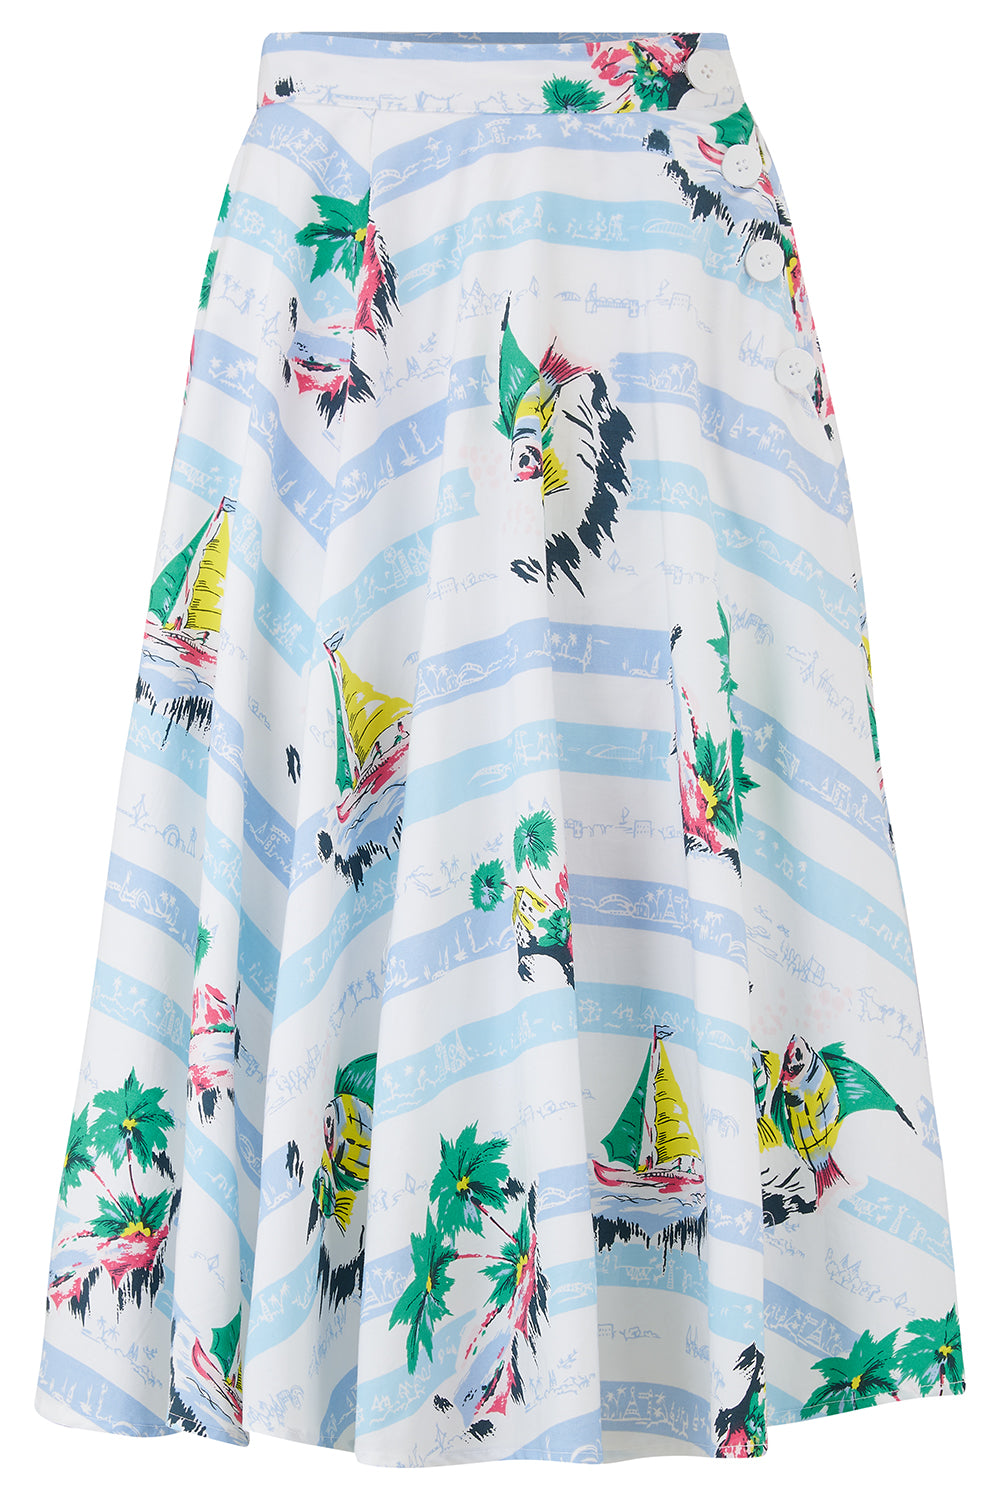 "Isabelle" Skirt in Cotton Seaside Print, Classic & Authentic 1940s Vintage Inspired Style